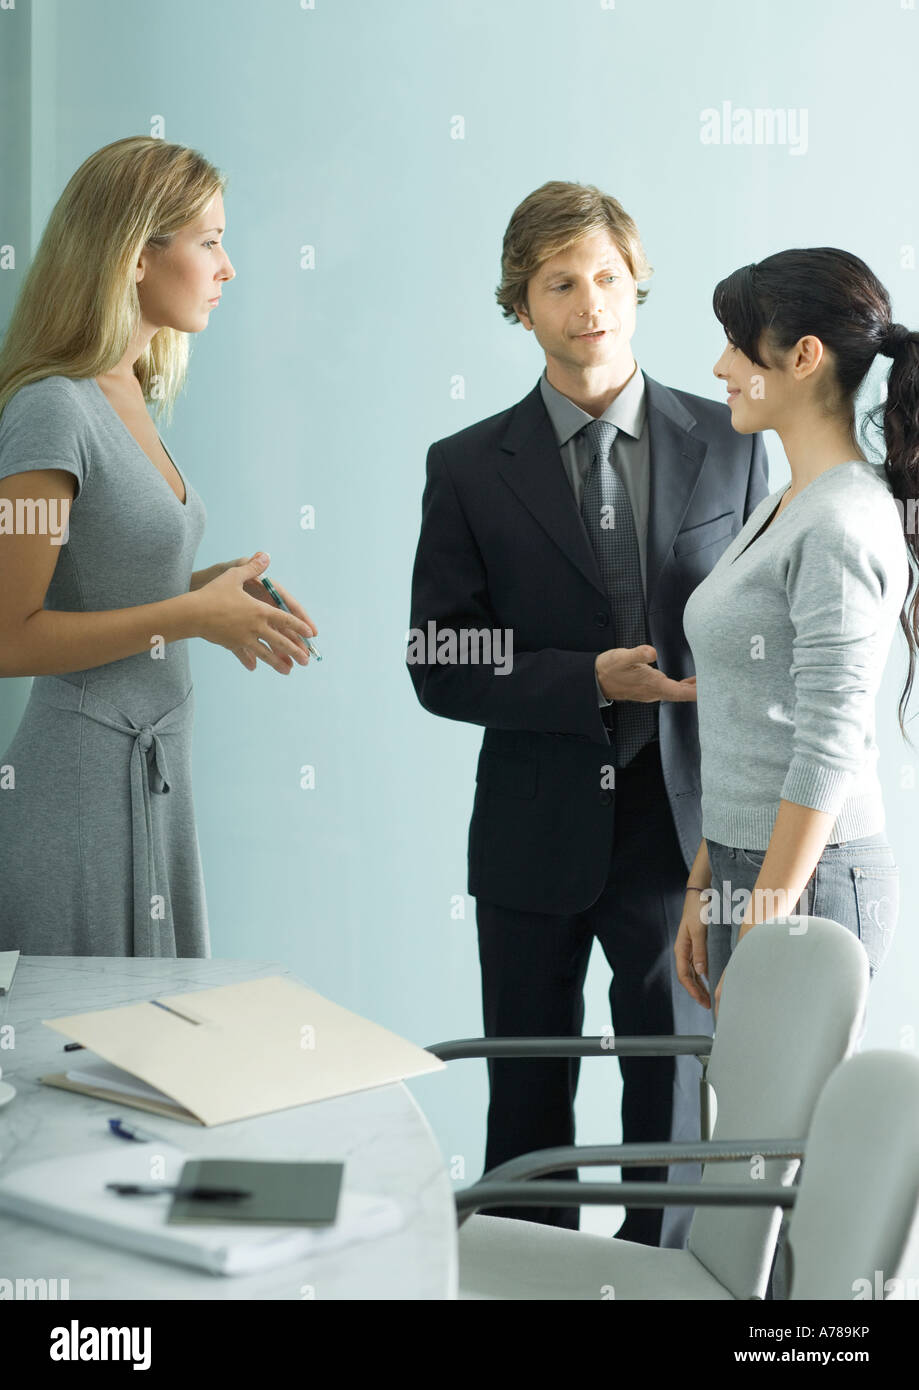 Businessman introducing teenage girl to young professional woman Stock Photo